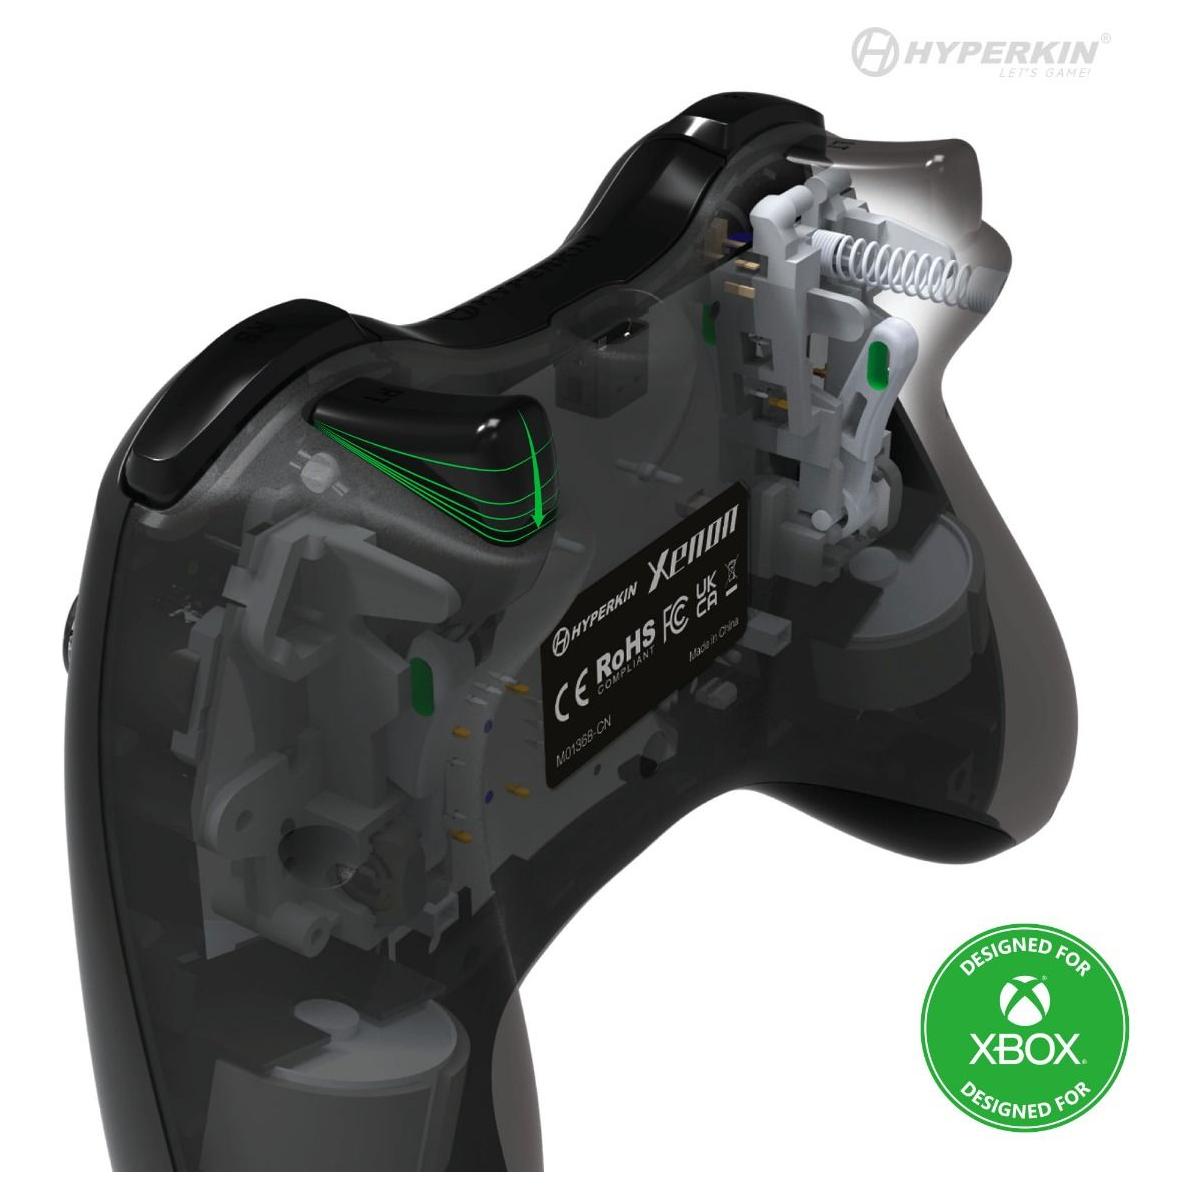 Xenon Wired Controller for Xbox One / Series X (Cosmic Night)